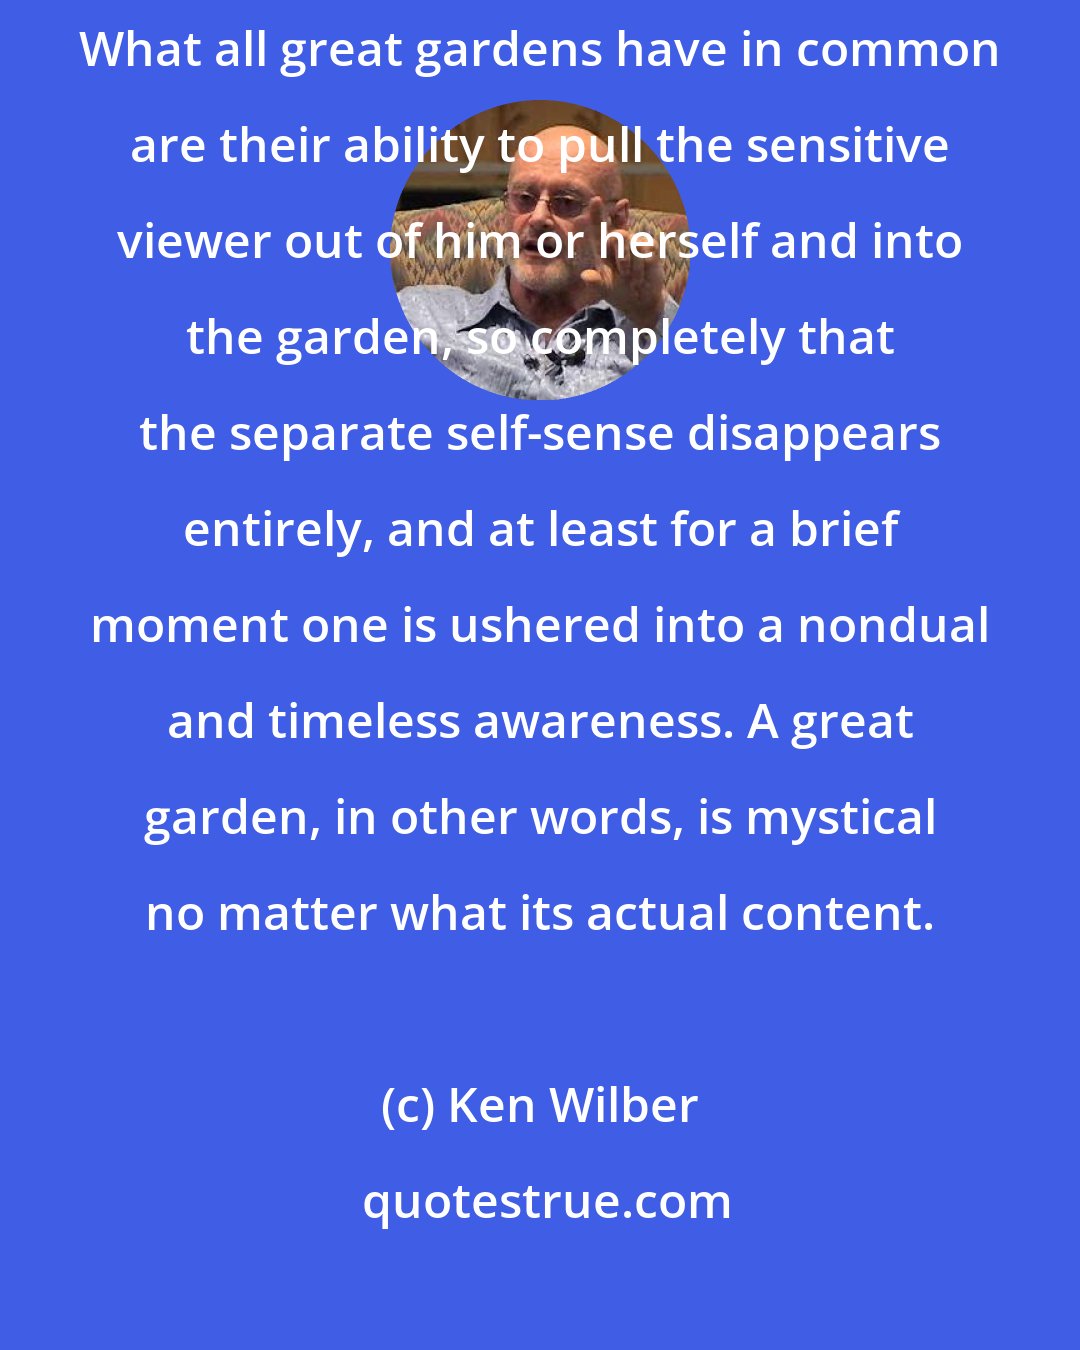 Ken Wilber: Bad Gardens copy, good gardens create, great gardens transcend. What all great gardens have in common are their ability to pull the sensitive viewer out of him or herself and into the garden, so completely that the separate self-sense disappears entirely, and at least for a brief moment one is ushered into a nondual and timeless awareness. A great garden, in other words, is mystical no matter what its actual content.